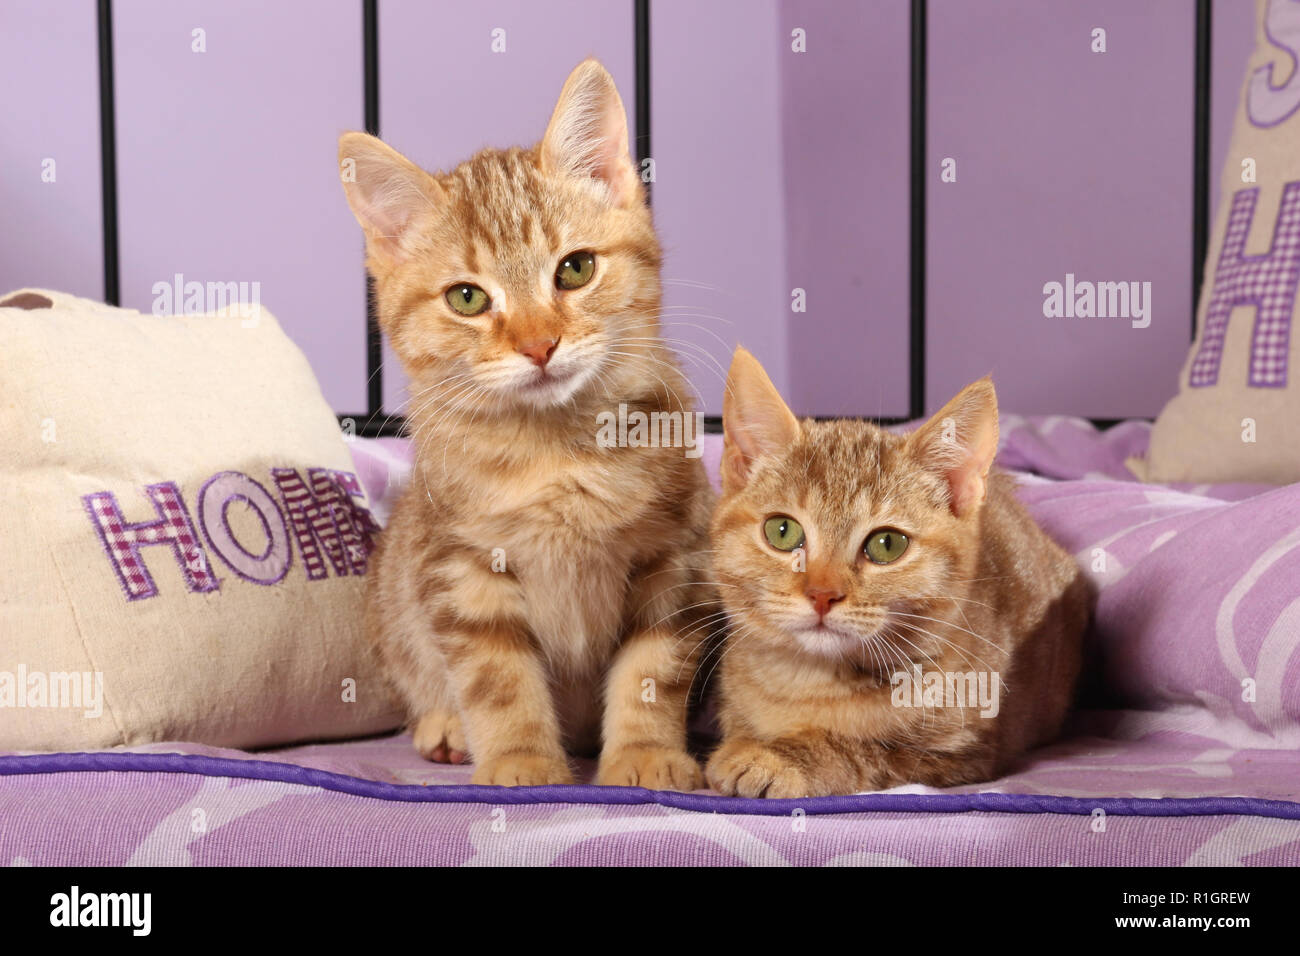 two ginger kittens, 12 weeks old, lying between pillows Stock Photo